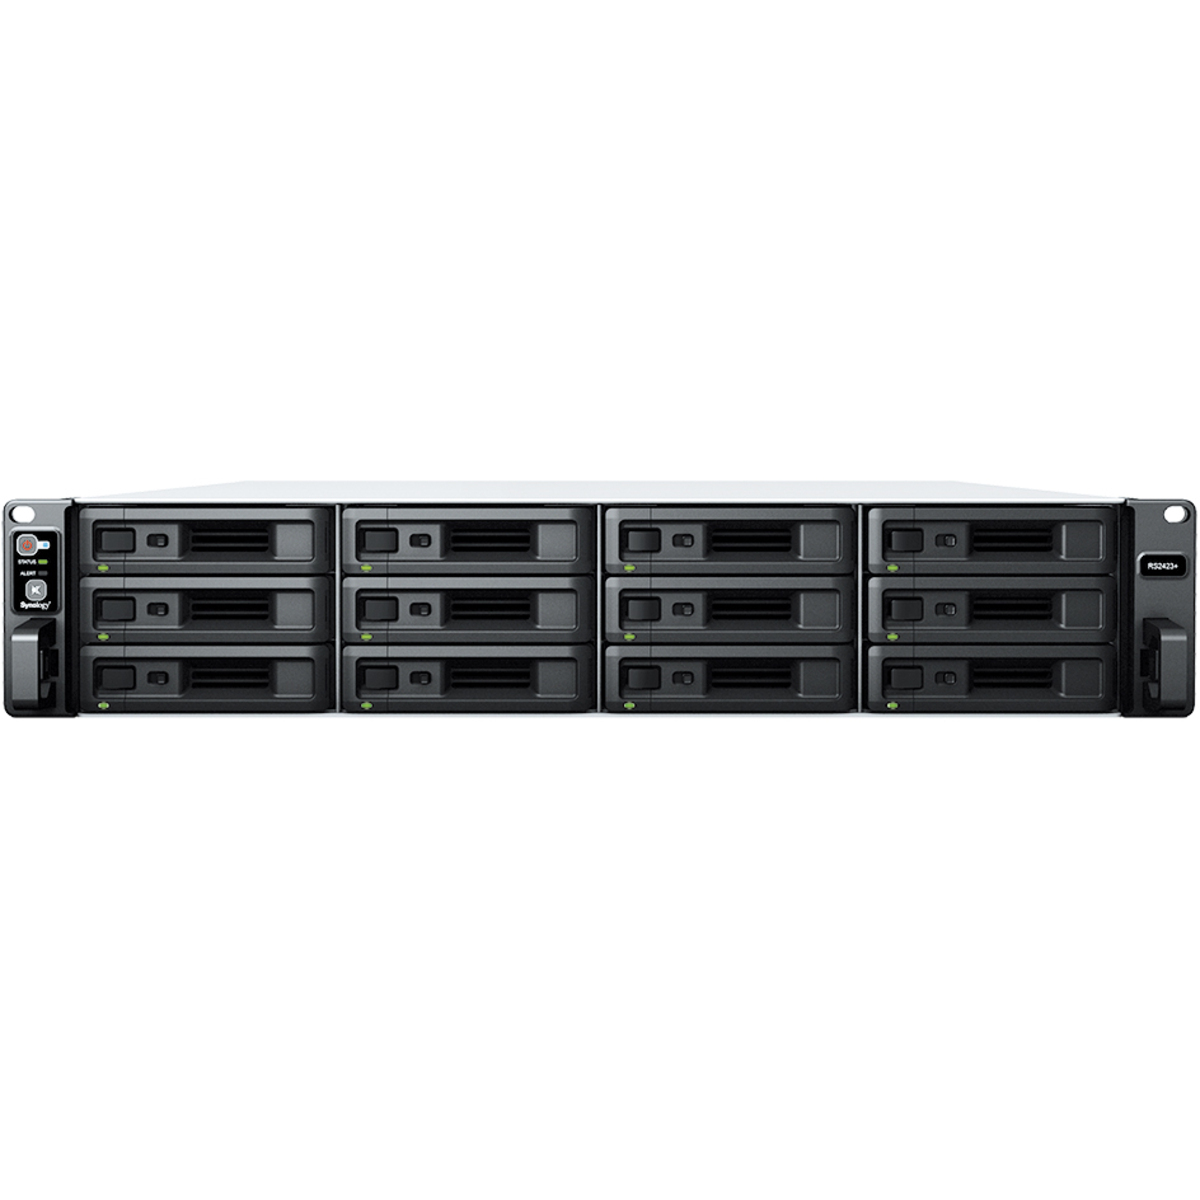 Synology RackStation RS2423RP+ 8tb 12-Bay RackMount Multimedia / Power User / Business NAS - Network Attached Storage Device 8x1tb Crucial MX500 CT1000MX500SSD1 2.5 560/510MB/s SATA 6Gb/s SSD CONSUMER Class Drives Installed - Burn-In Tested - FREE RAM UPGRADE RackStation RS2423RP+